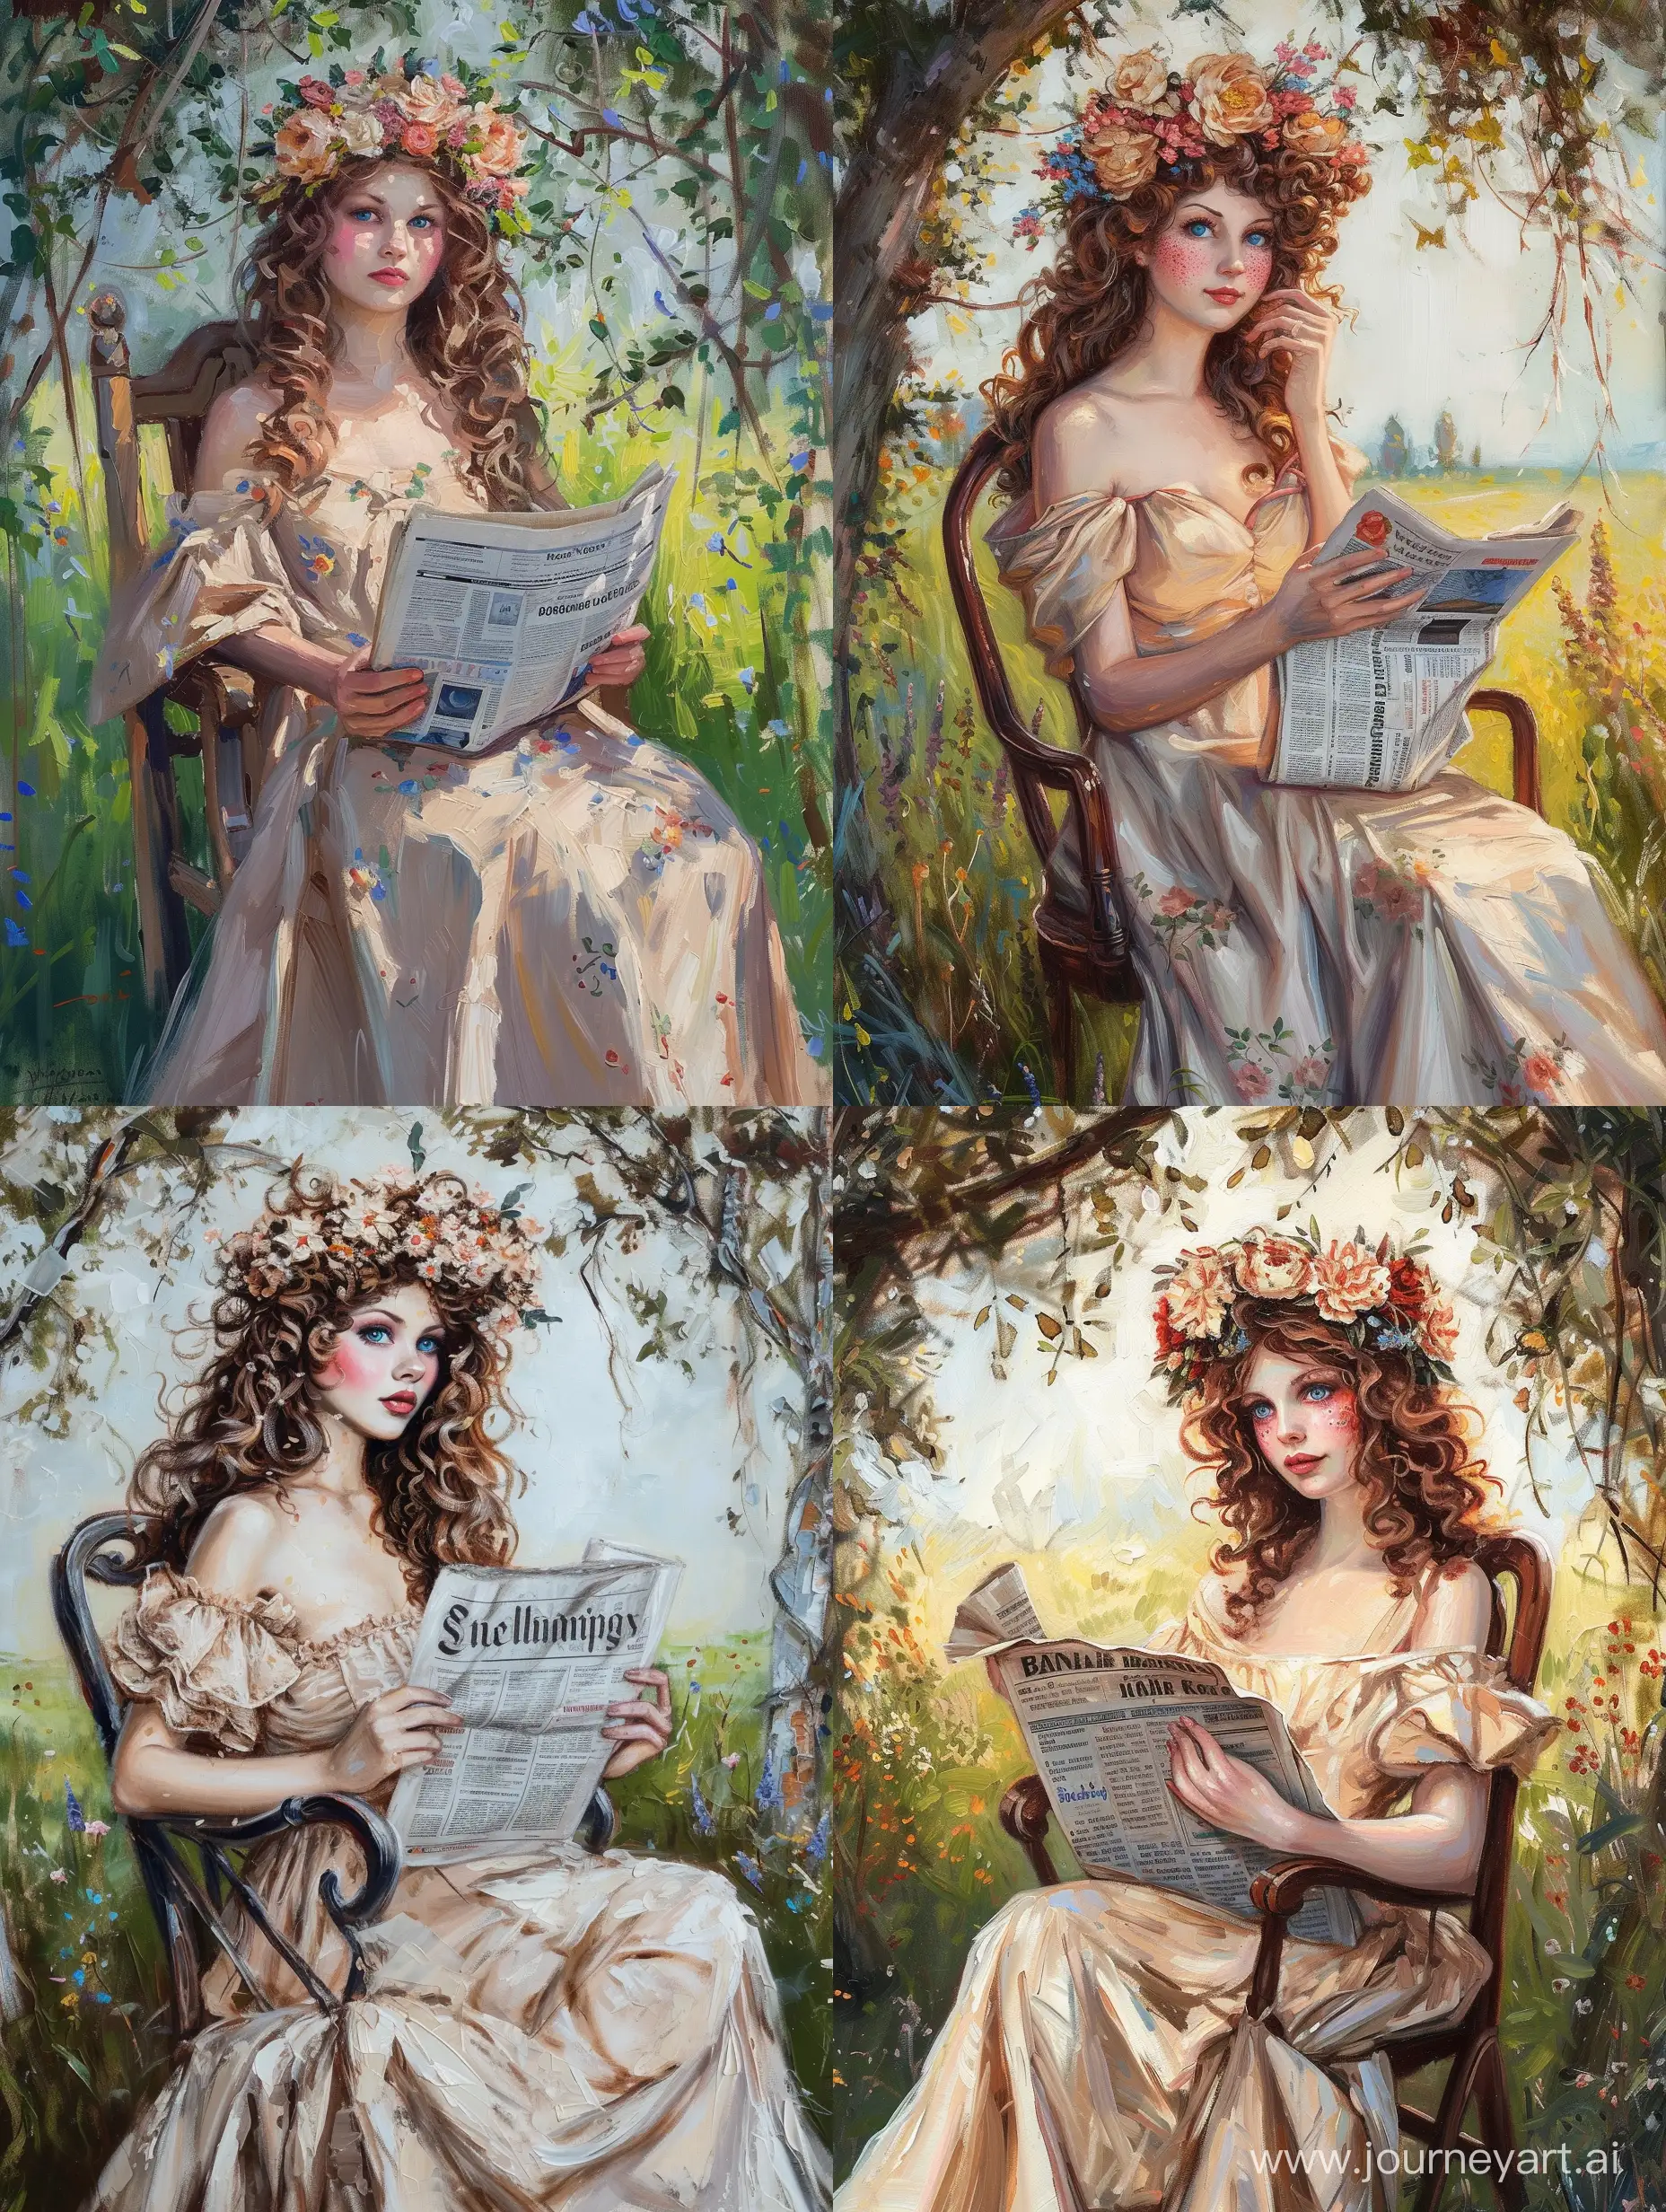 Beautiful impressionism painting of a British lady wearing floral crown,rosy cheeks,muscara blue eyes,white tan skin,brown curly styled long hair, long gown dress reading newspaper while sitting on chair under medow's sunlight coming through canopy of beautiful wild trees, impressionism painting with visible highly detailed brush strokes